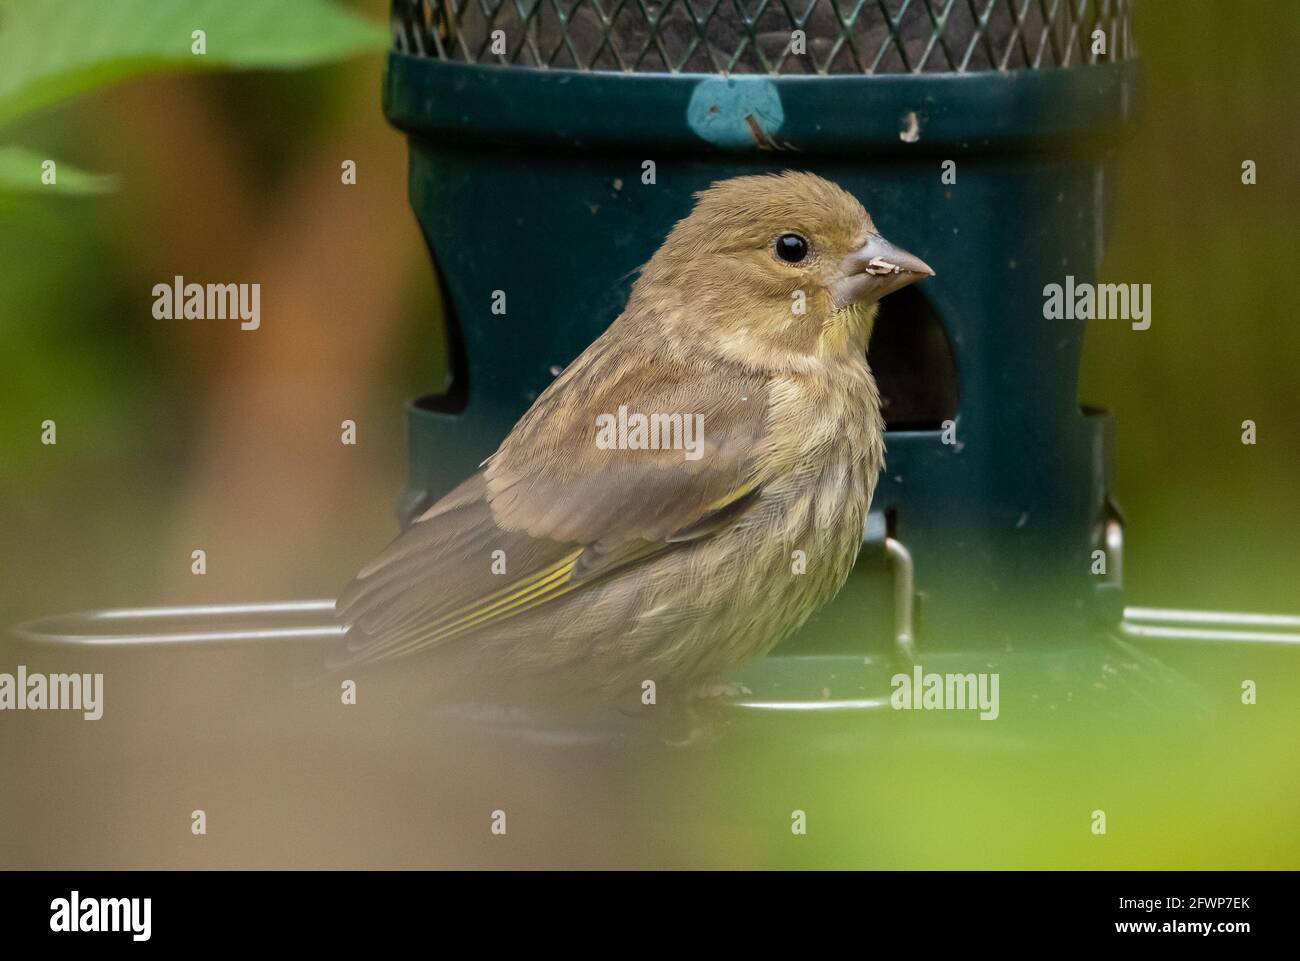 Close-up of a female greenfinch on a bird feeder in a garden,Chipping, Preston, Lancashire, UK Stock Photo